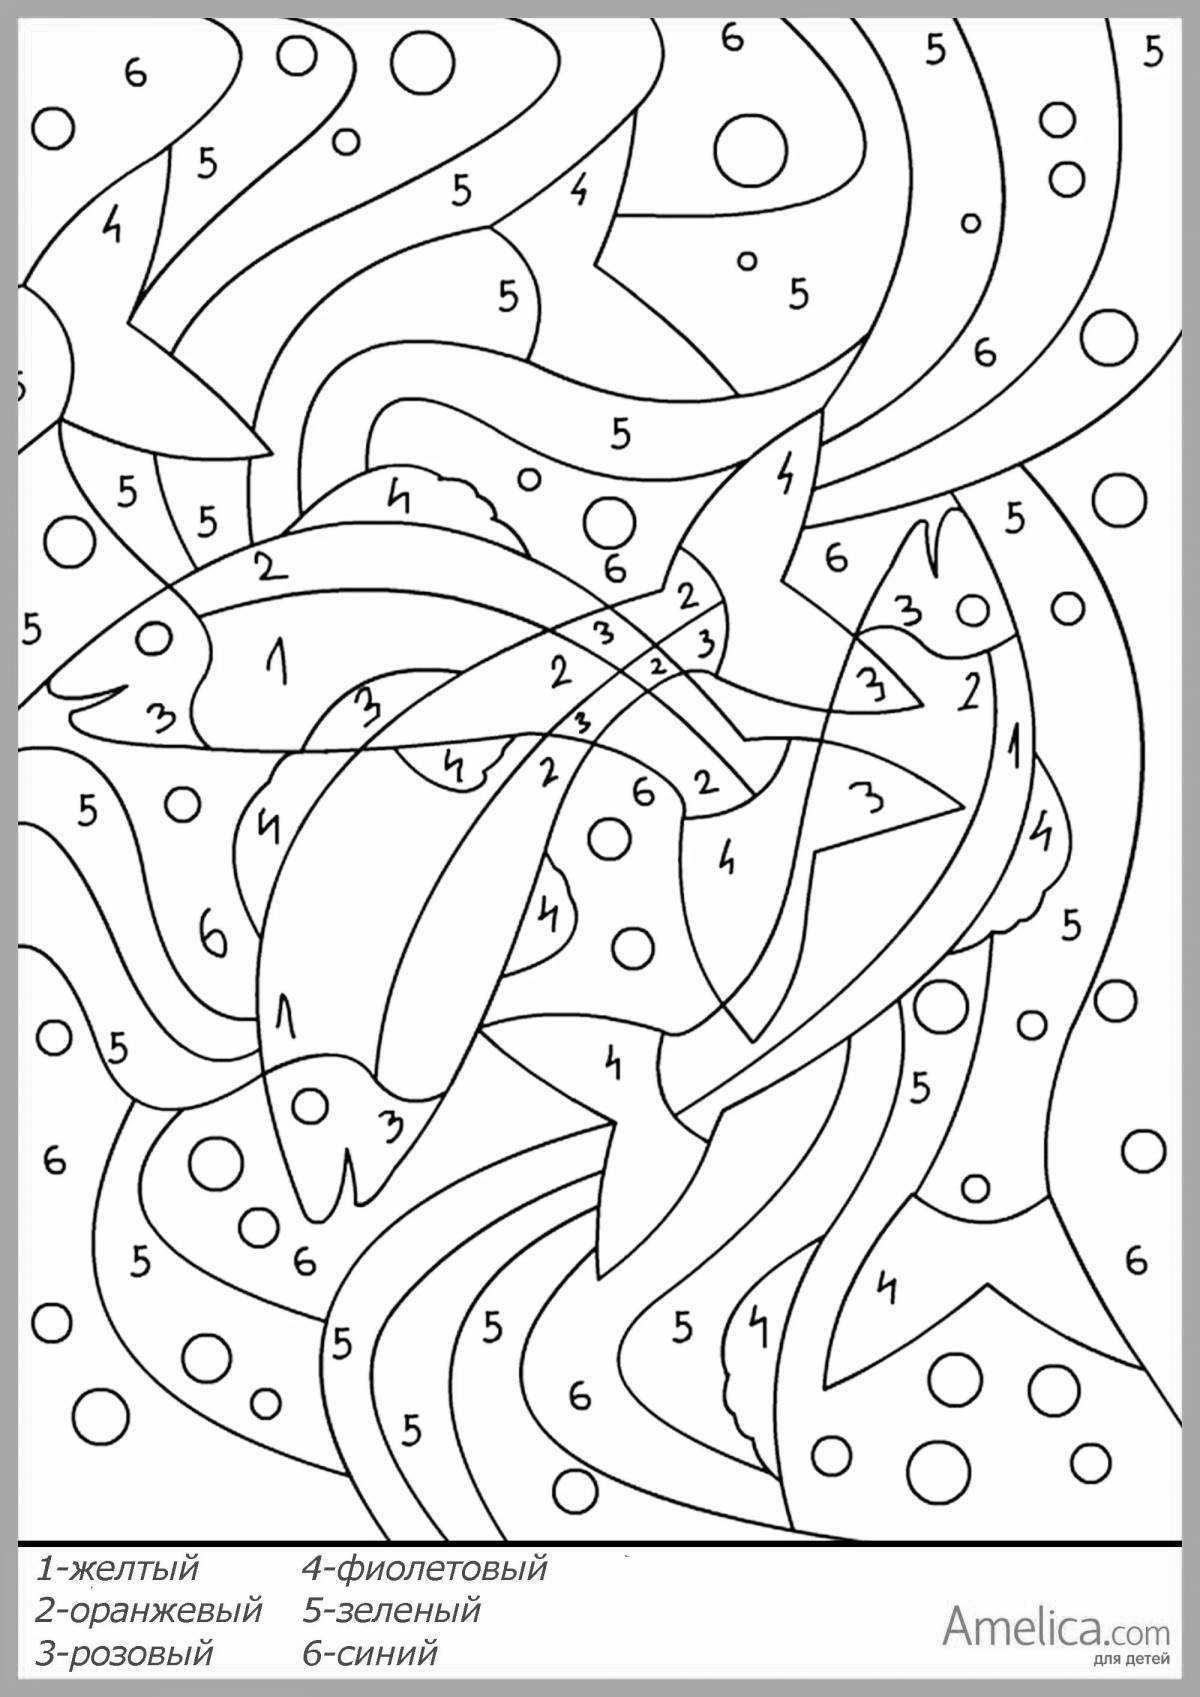 Color digital coloring book for children 7 years old